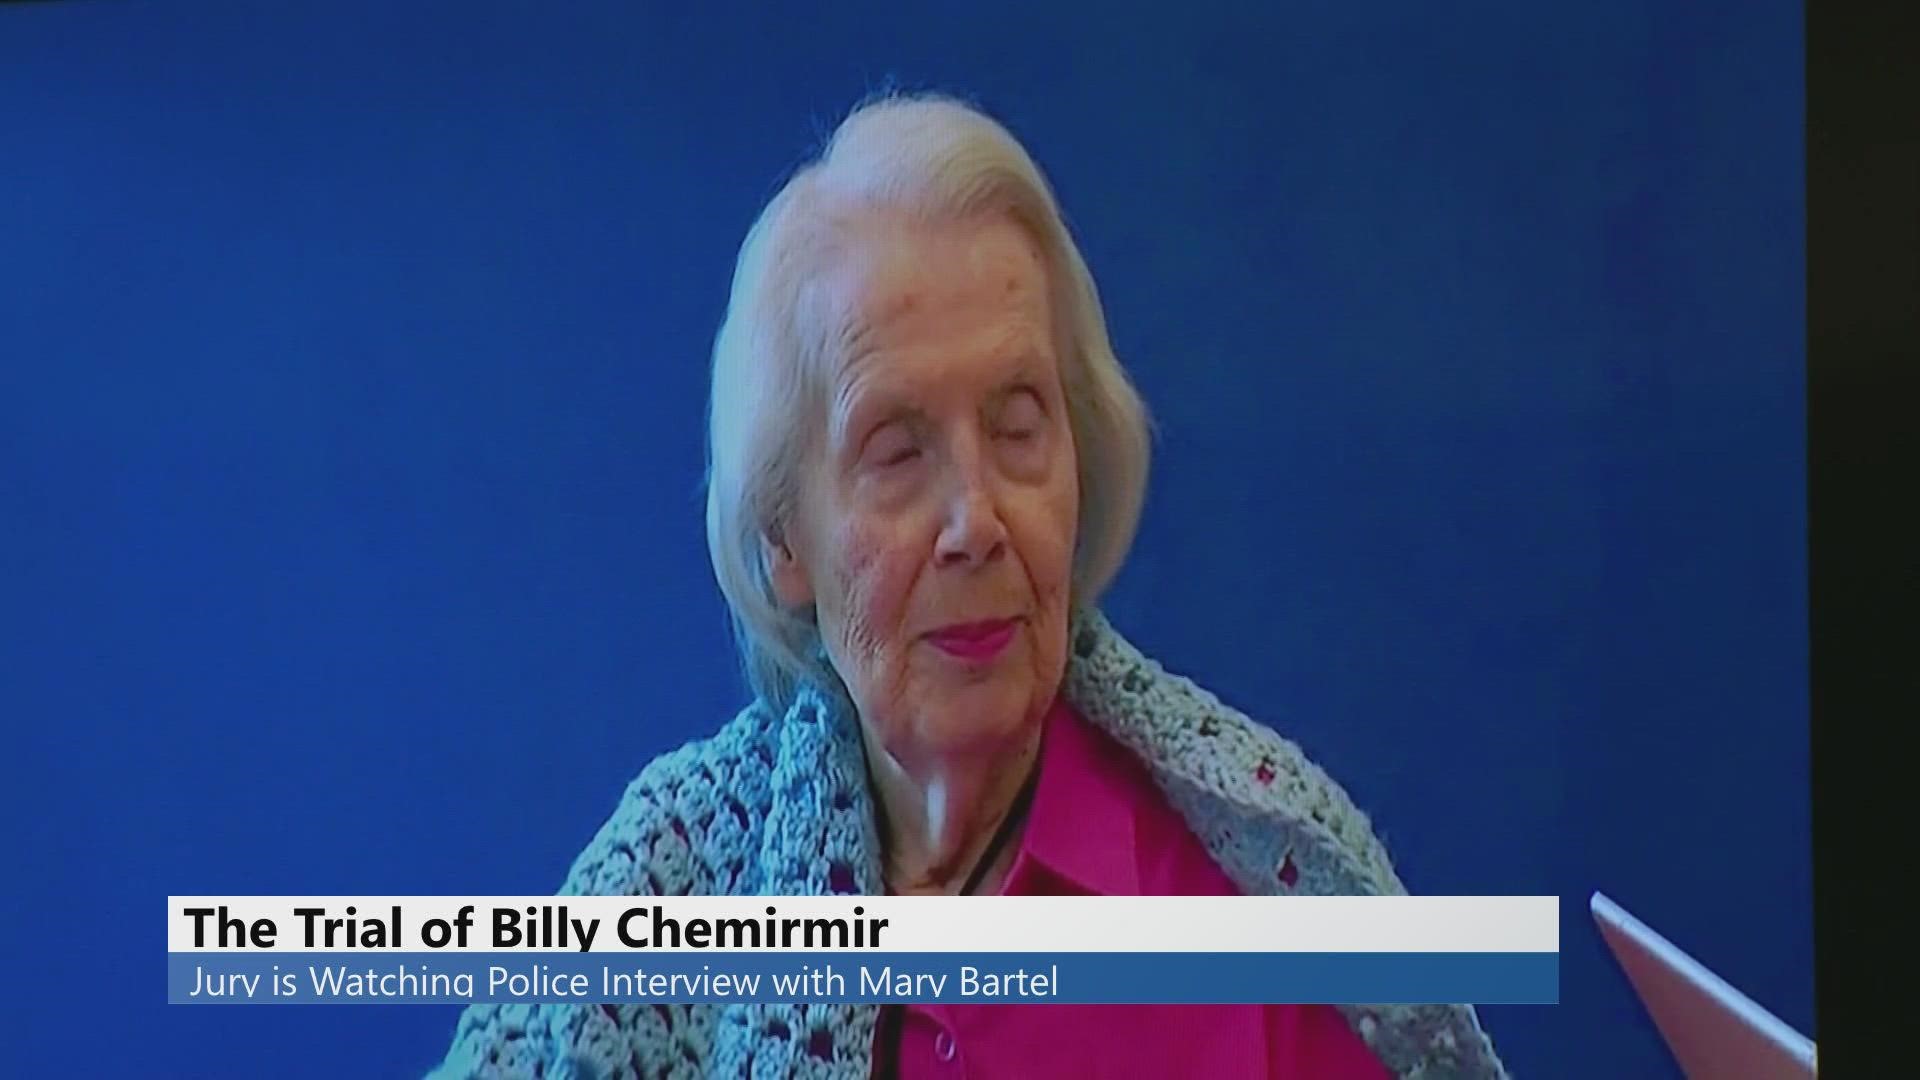 Billy Chemirmir is accused of robbing and smothering 91-year-old Mary Bartel in March 2018. She since died, but the state played a recording of her testimony Monday.